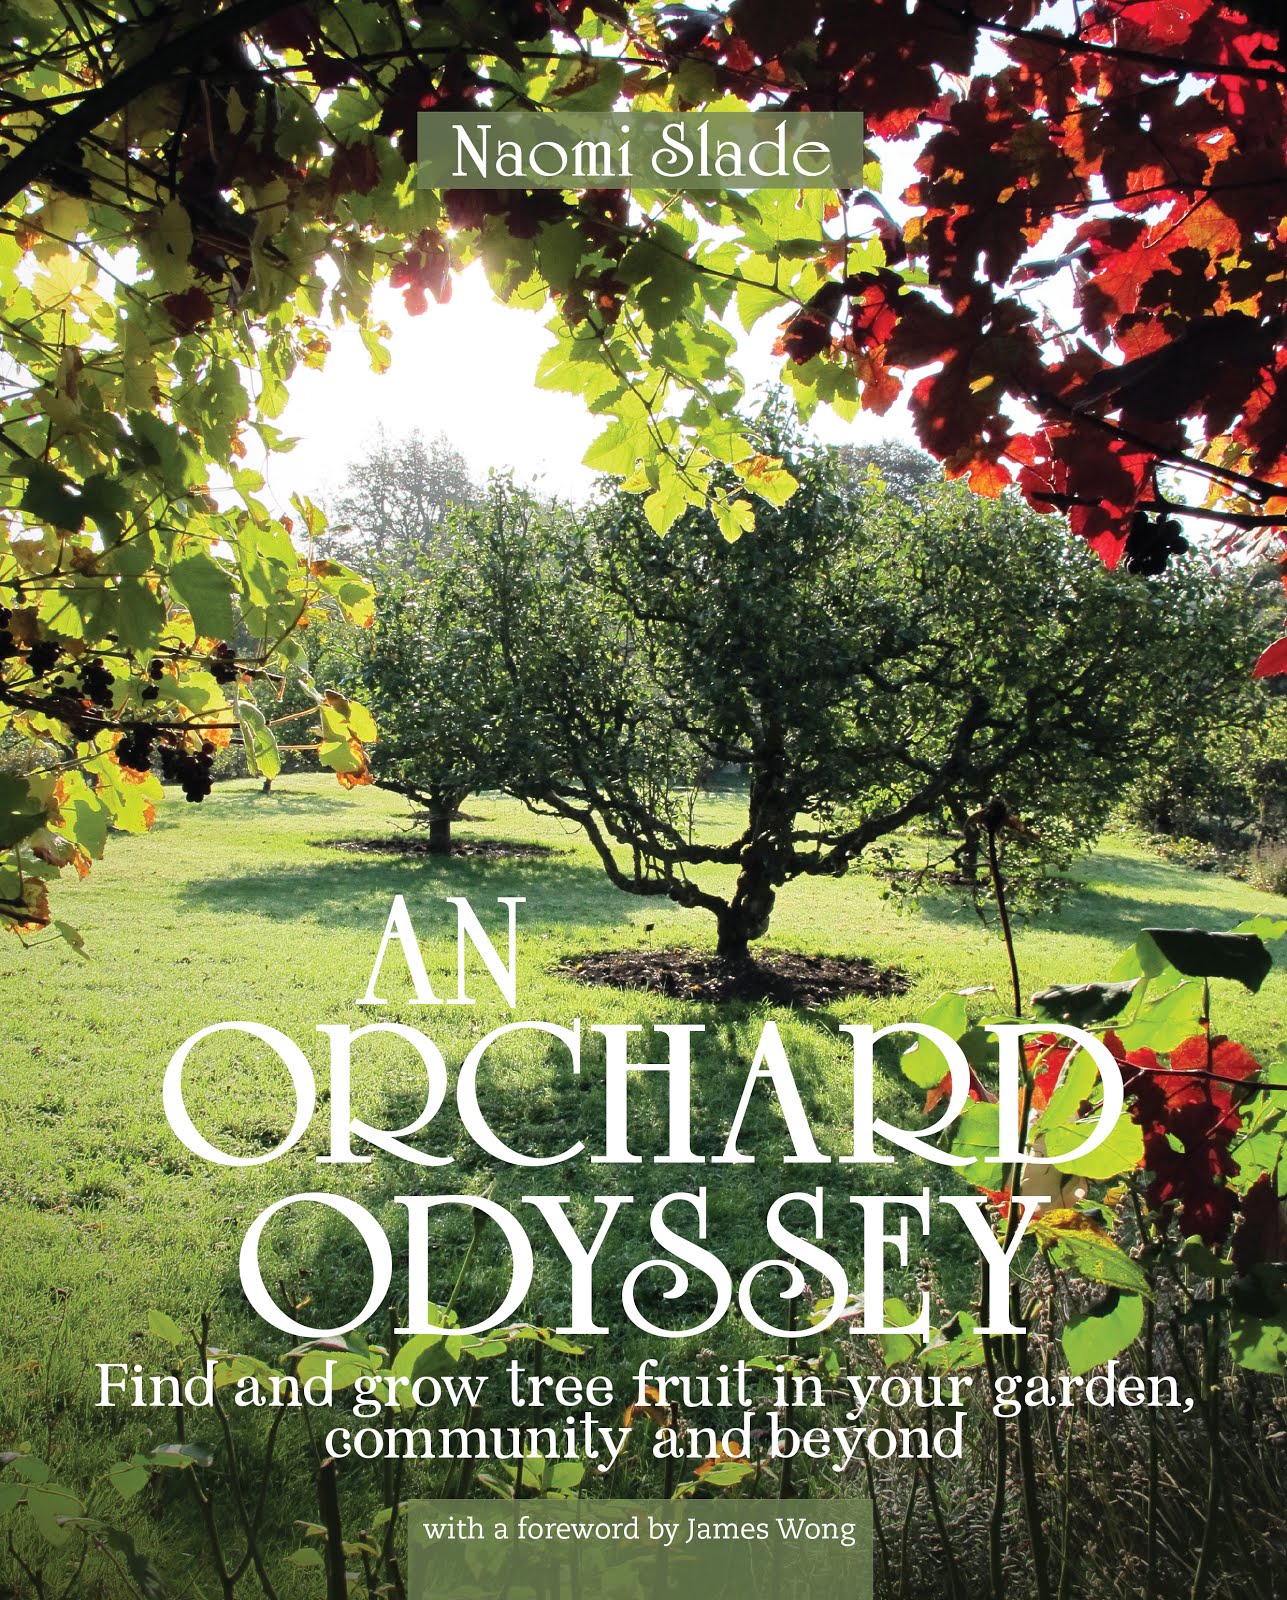 An Orchard Odyssey